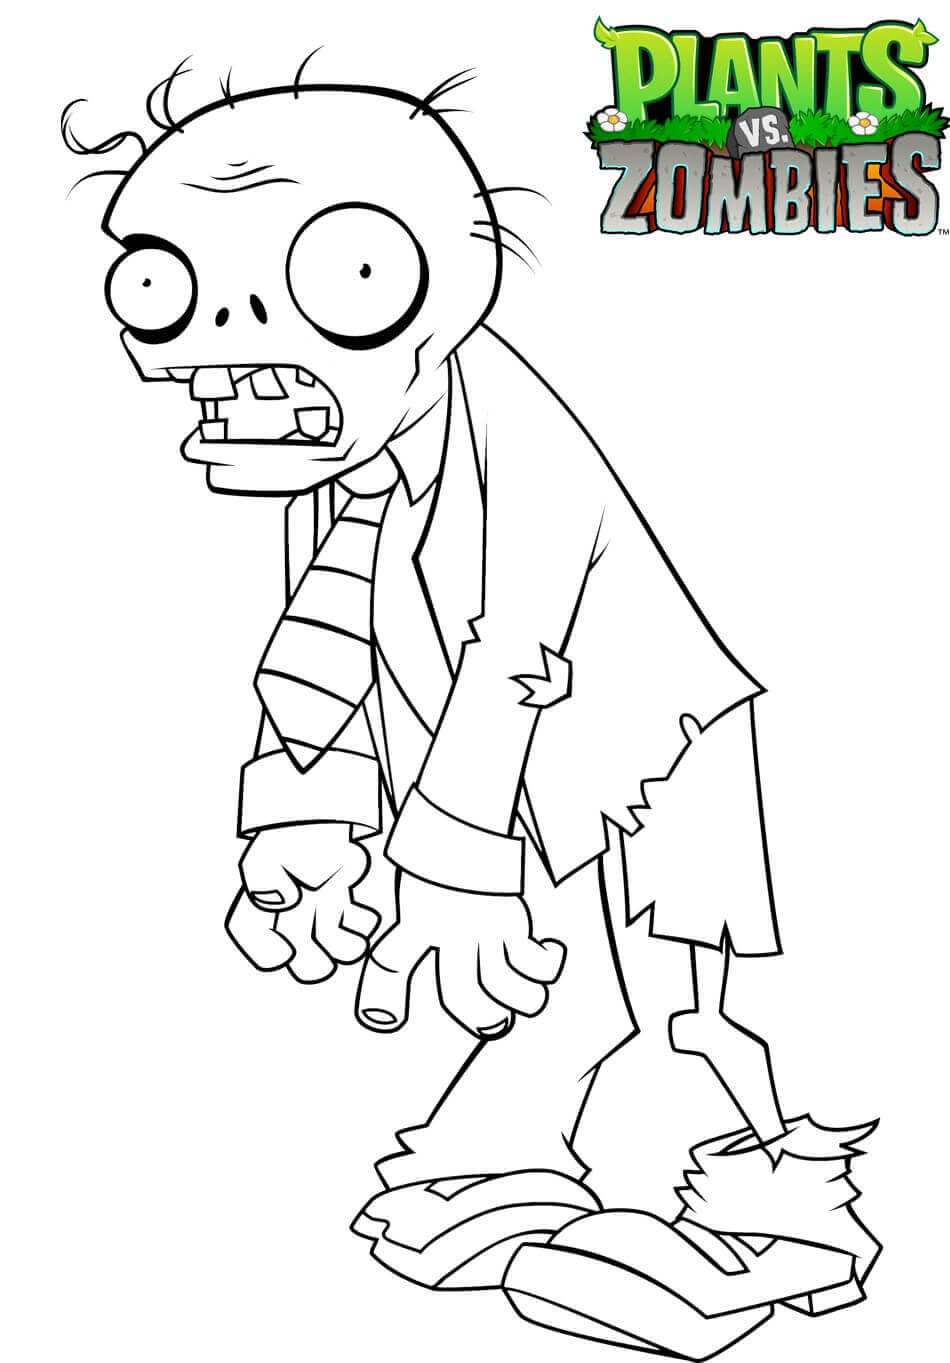 Plants Zombies Coloring Pages Coloring Pages